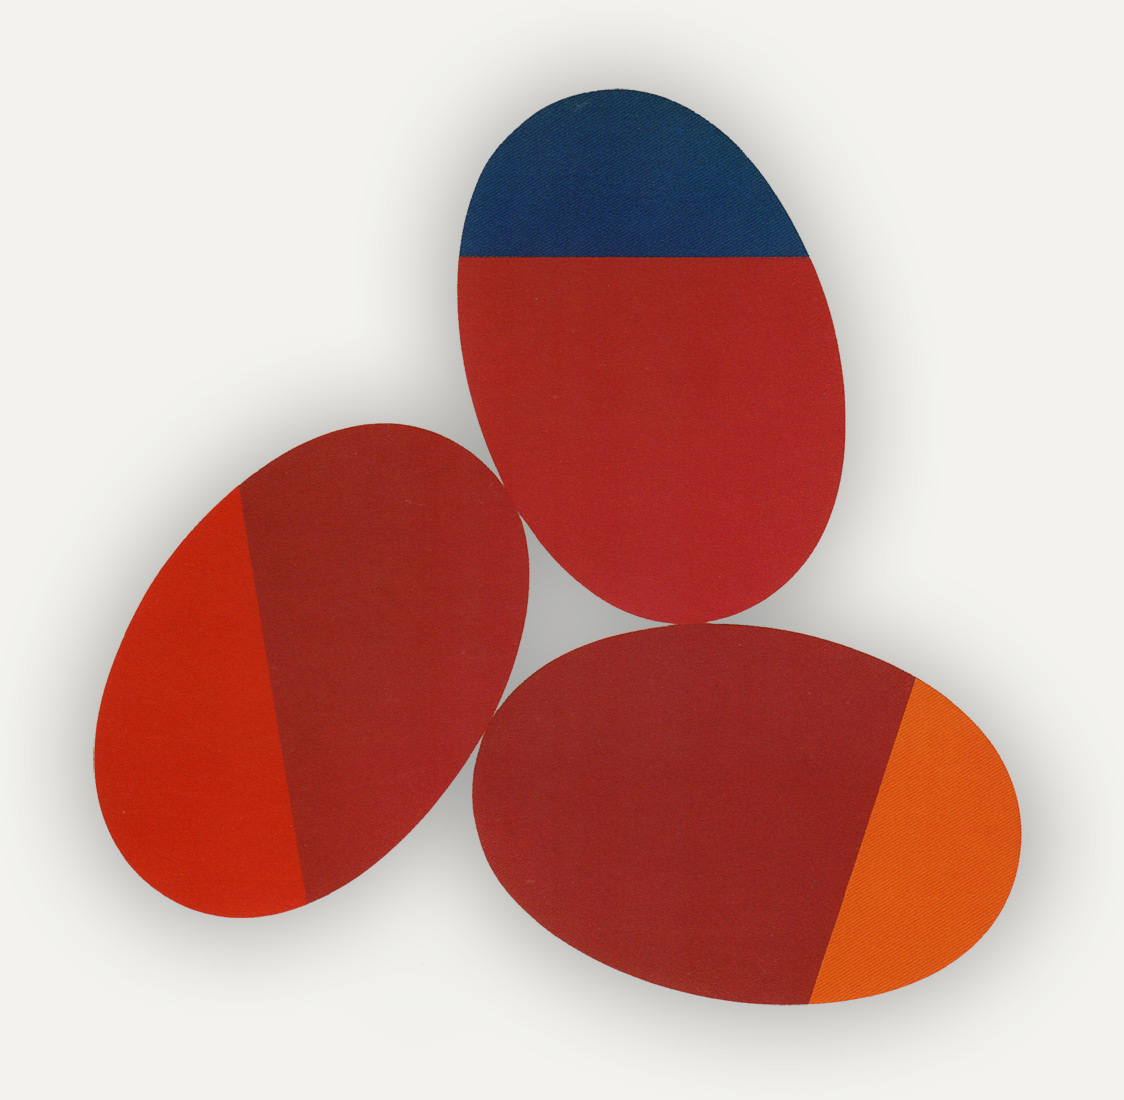 The artwork Constellation M by Leon Polk Smith is comprised fo three oval canvases arranged in a way that feels like they are each lookin in on one another. The circles have a straight line splitting a third of them giving each an accent color, one is a brighter red than the red of the canvas, the other is a dark blue and the the third a golden color verging on orange. The three canvases touch each other in a way that they create a negative space where they meet that draws your eye towards the center of the work while at the same time, the accent colors are positioned at the far edges of the ovals drawing your eye in an outward motion. The eye can also see the base red color in the canvas as a larger shape that is overlapping everything like a large irregular upside-down triangle.